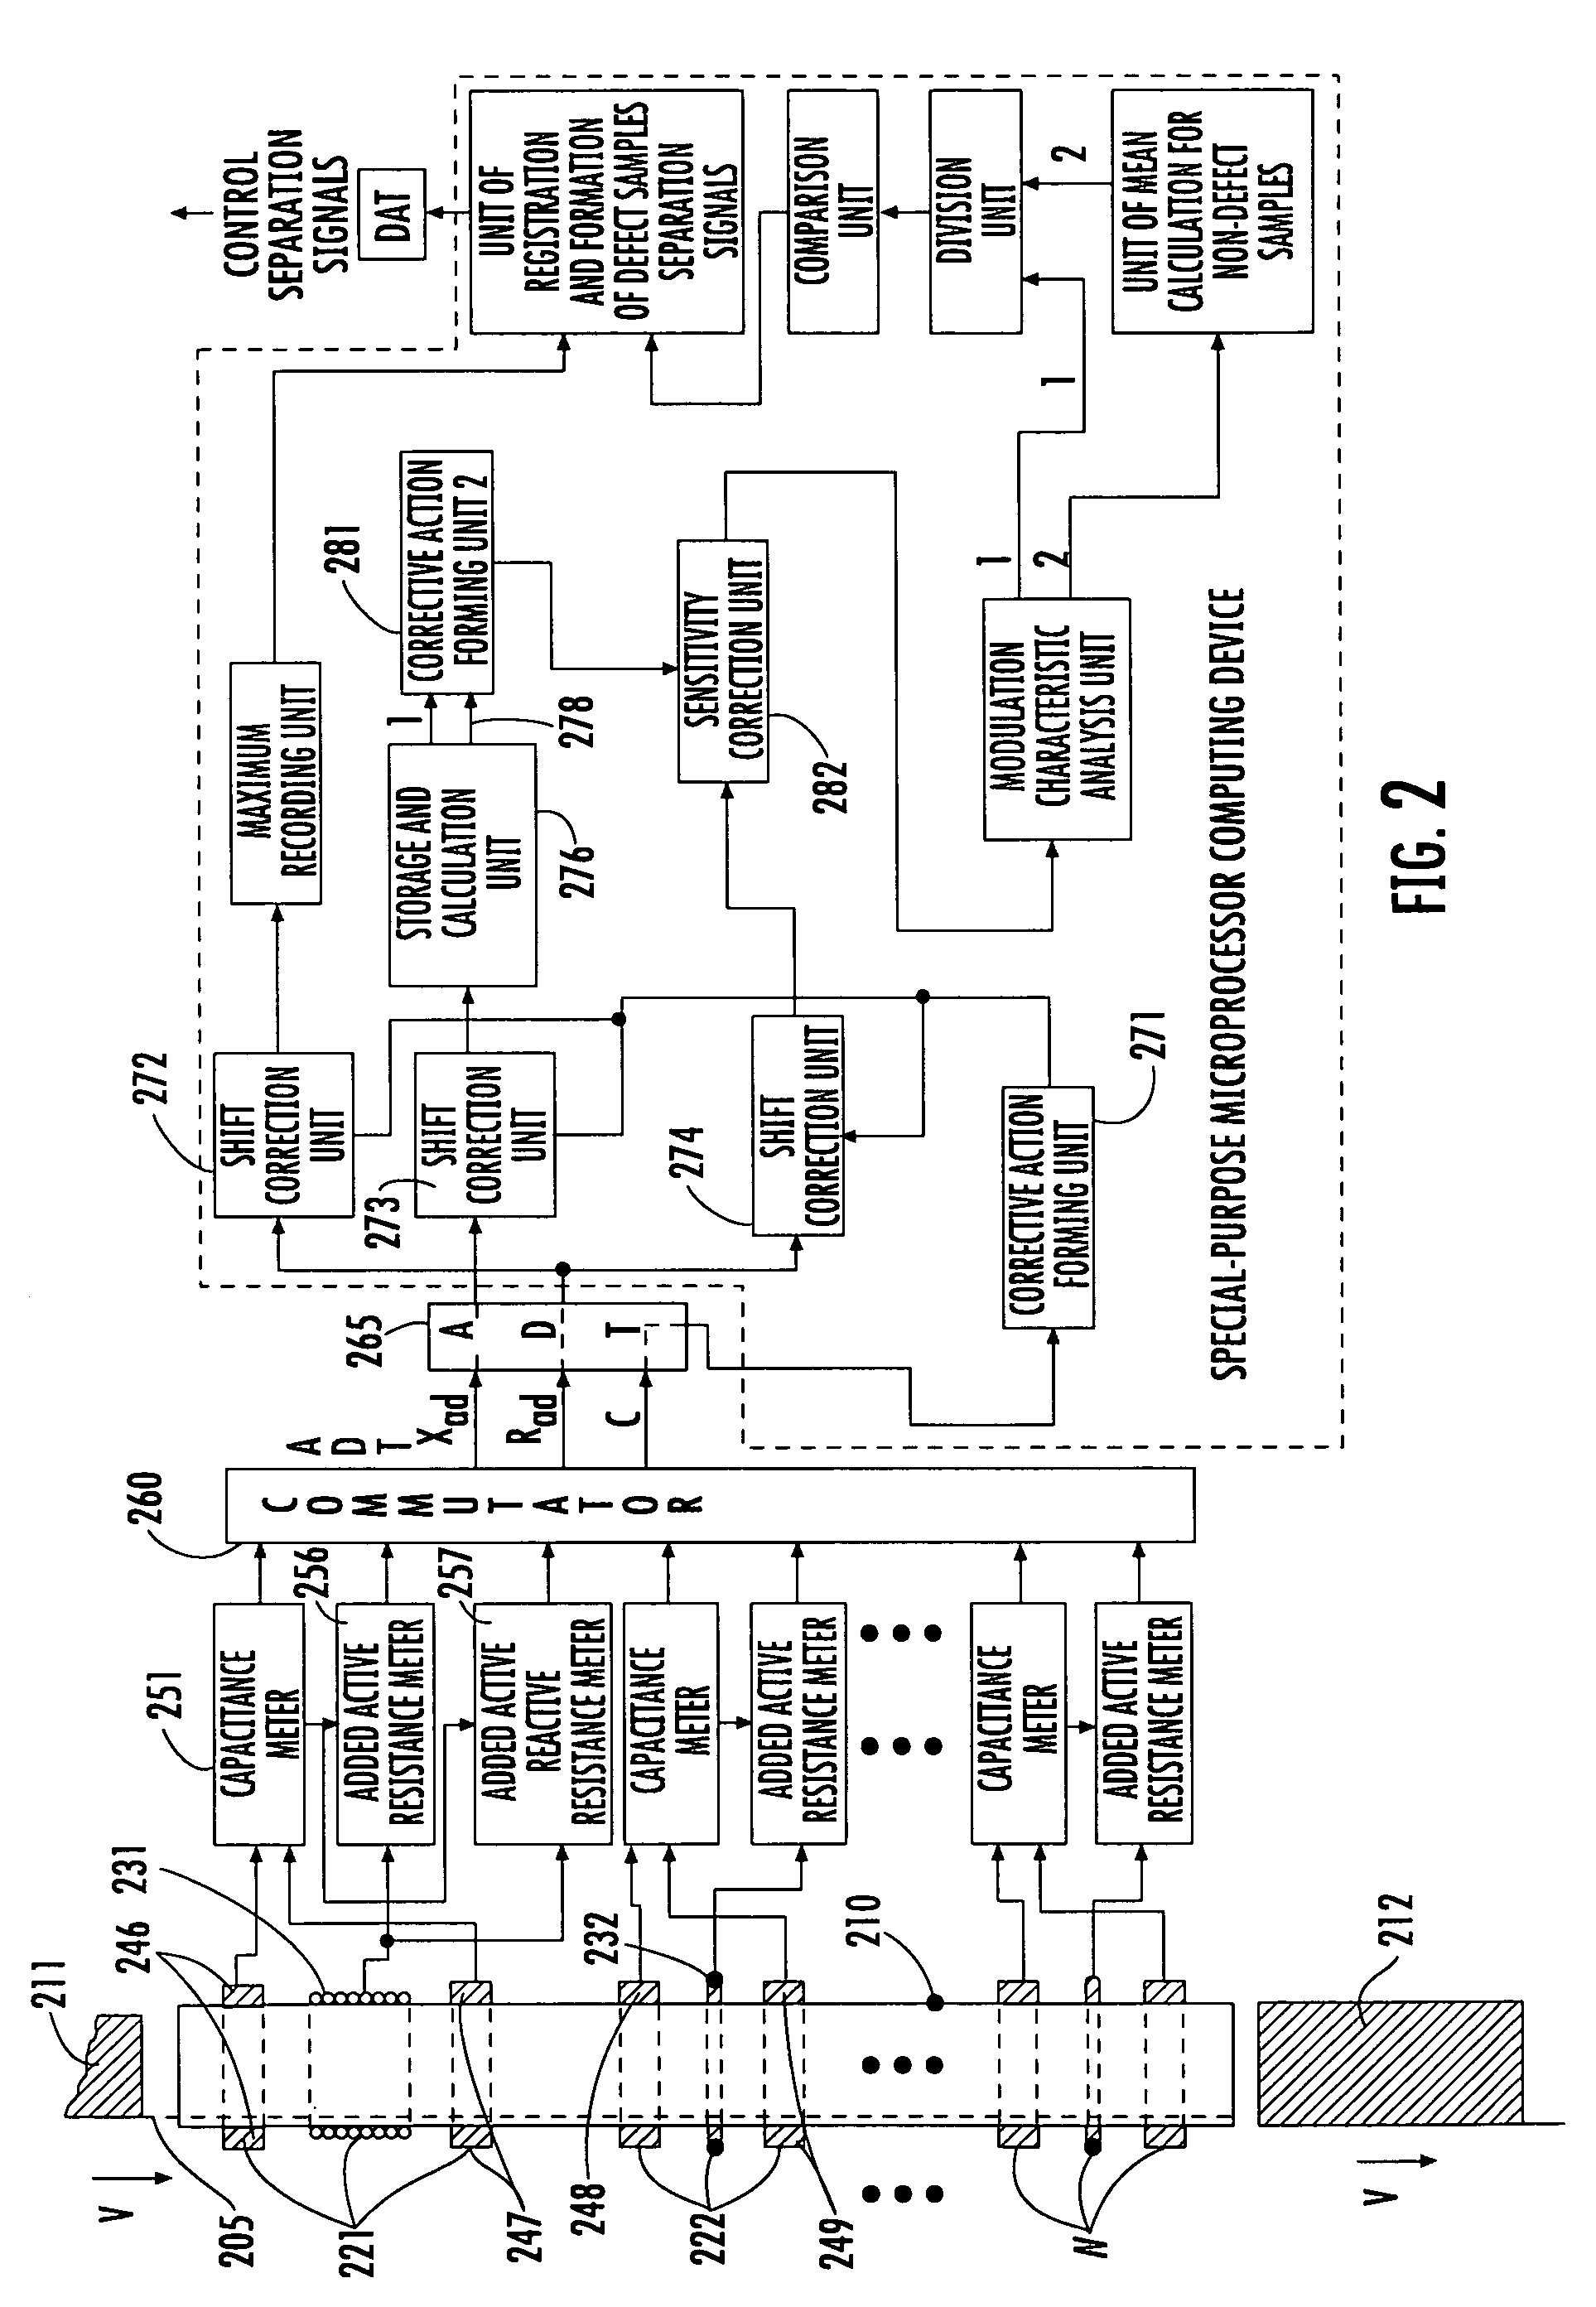 Method and apparatus for eddy current-based quality inspection of dry electrode structure